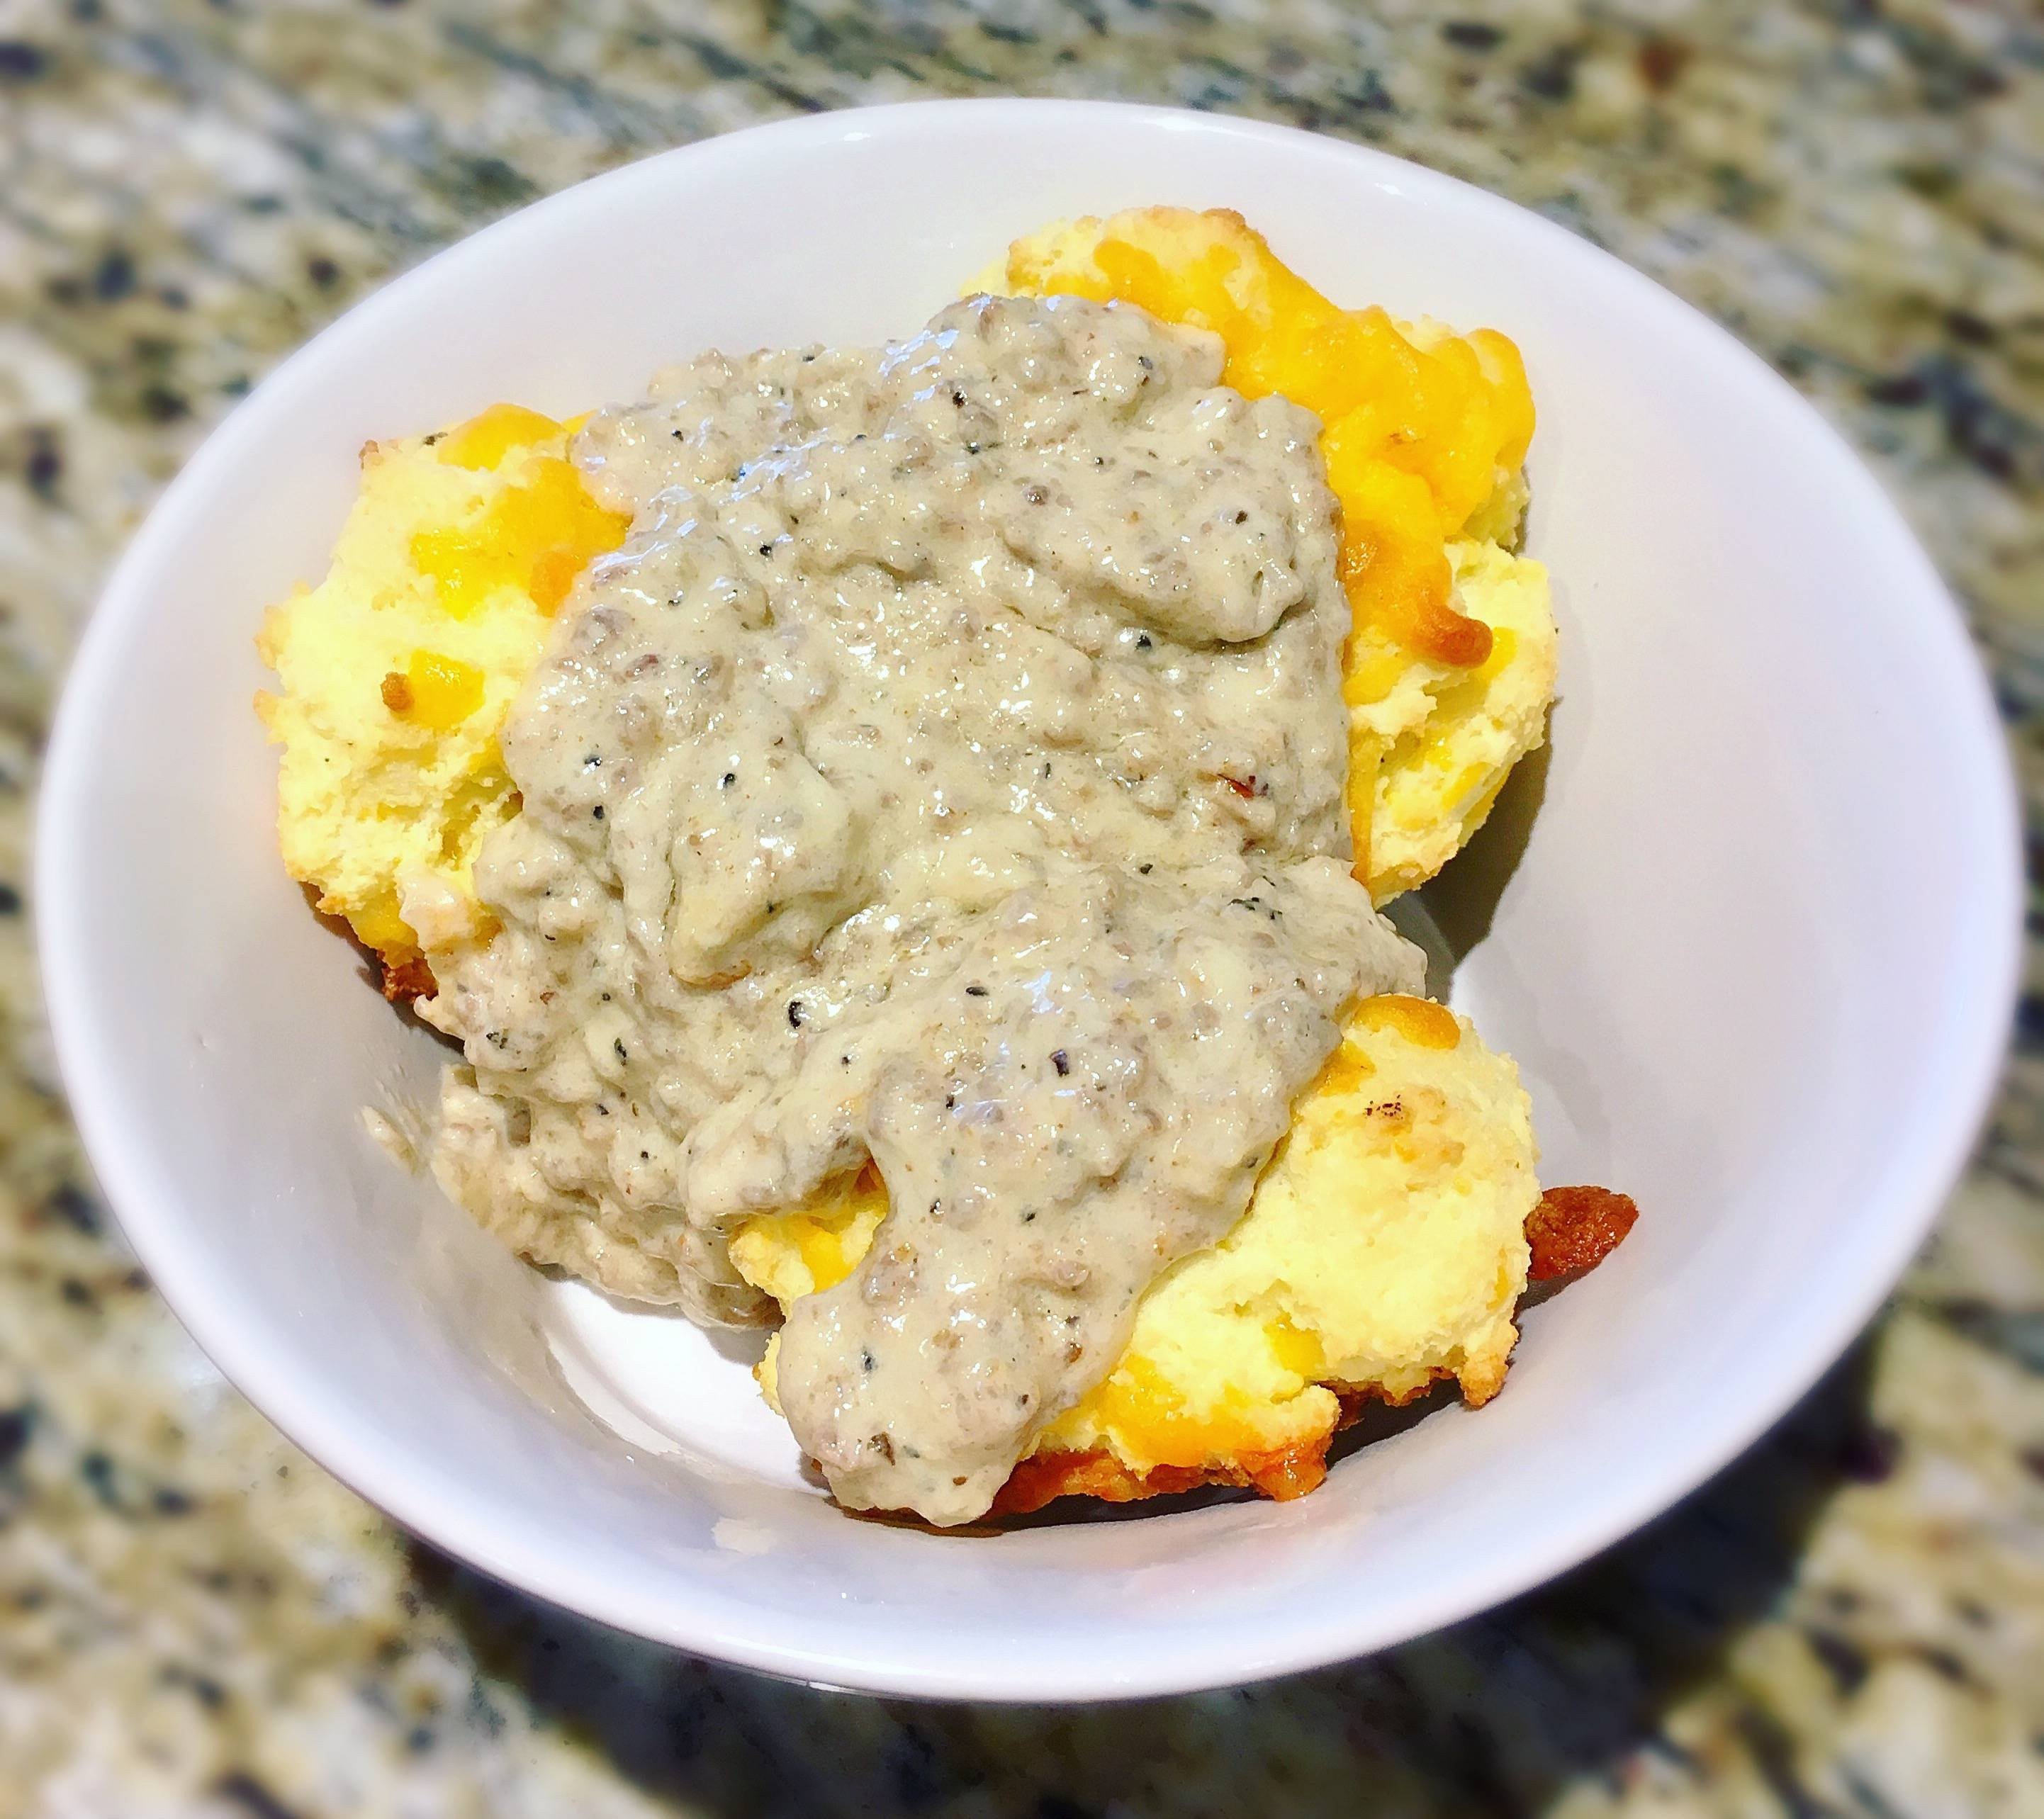 Keto Biscuits And Gravy
 biscuits gravy keto style ketorecipes